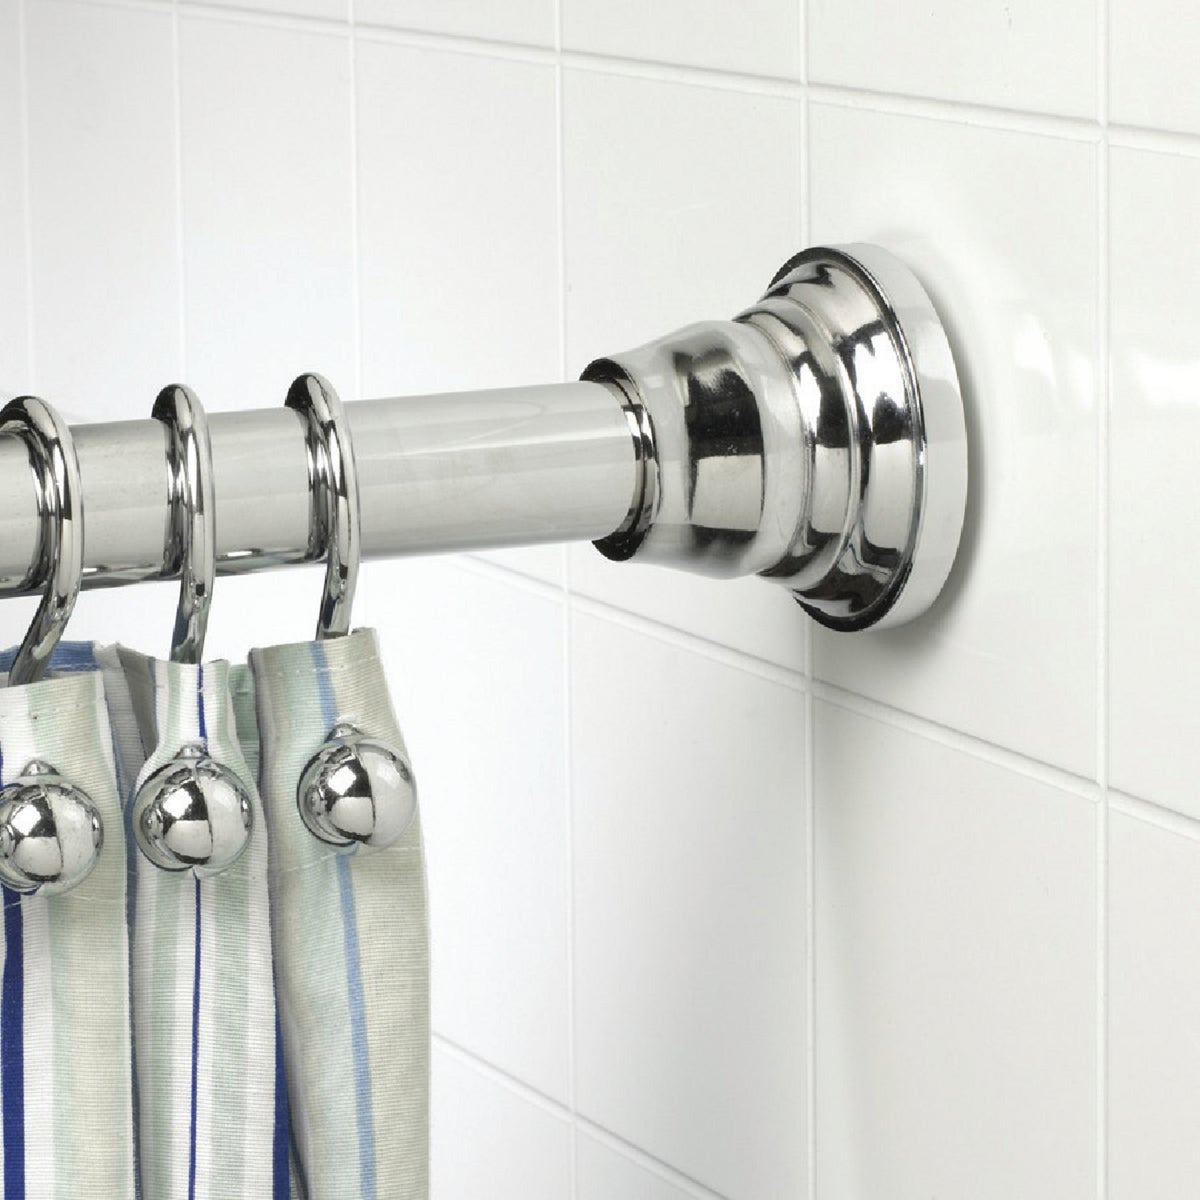 Item 406473, Customize or upgrade your bathroom instantly with the Decorative Adjustable